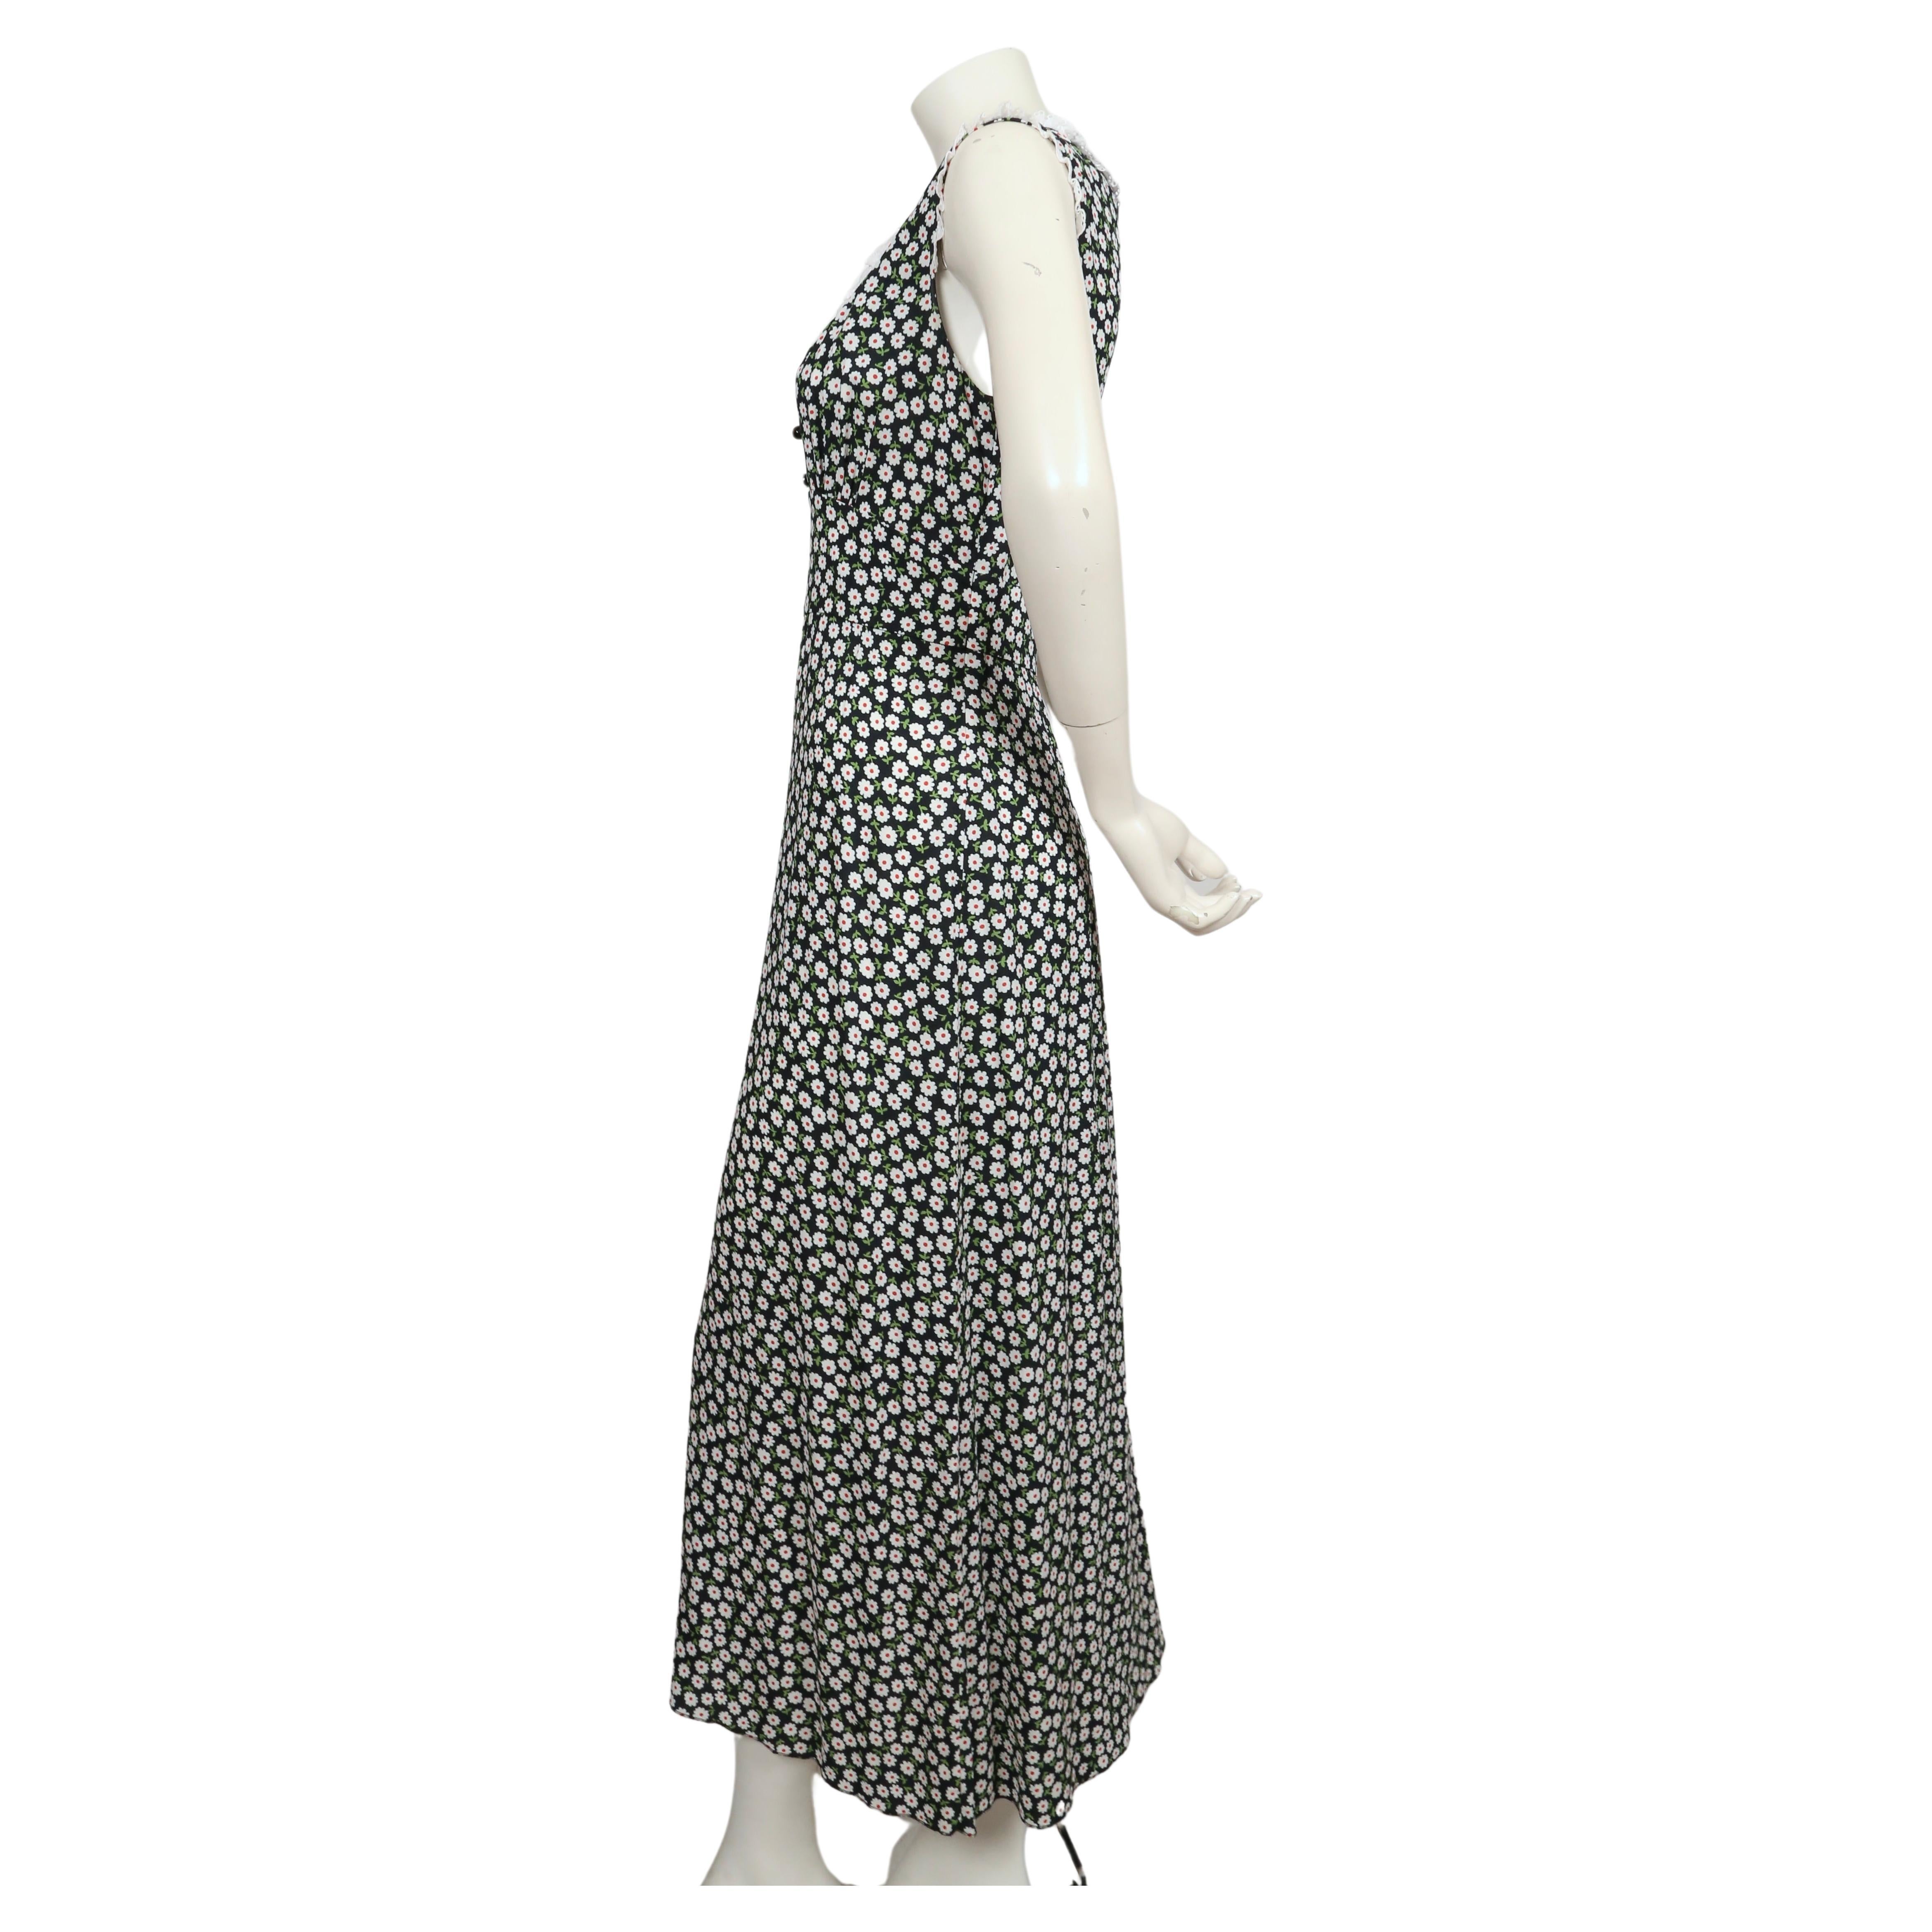 MIU MIU floral maxi dress with Broderie Anglaise lace trim In Good Condition For Sale In San Fransisco, CA